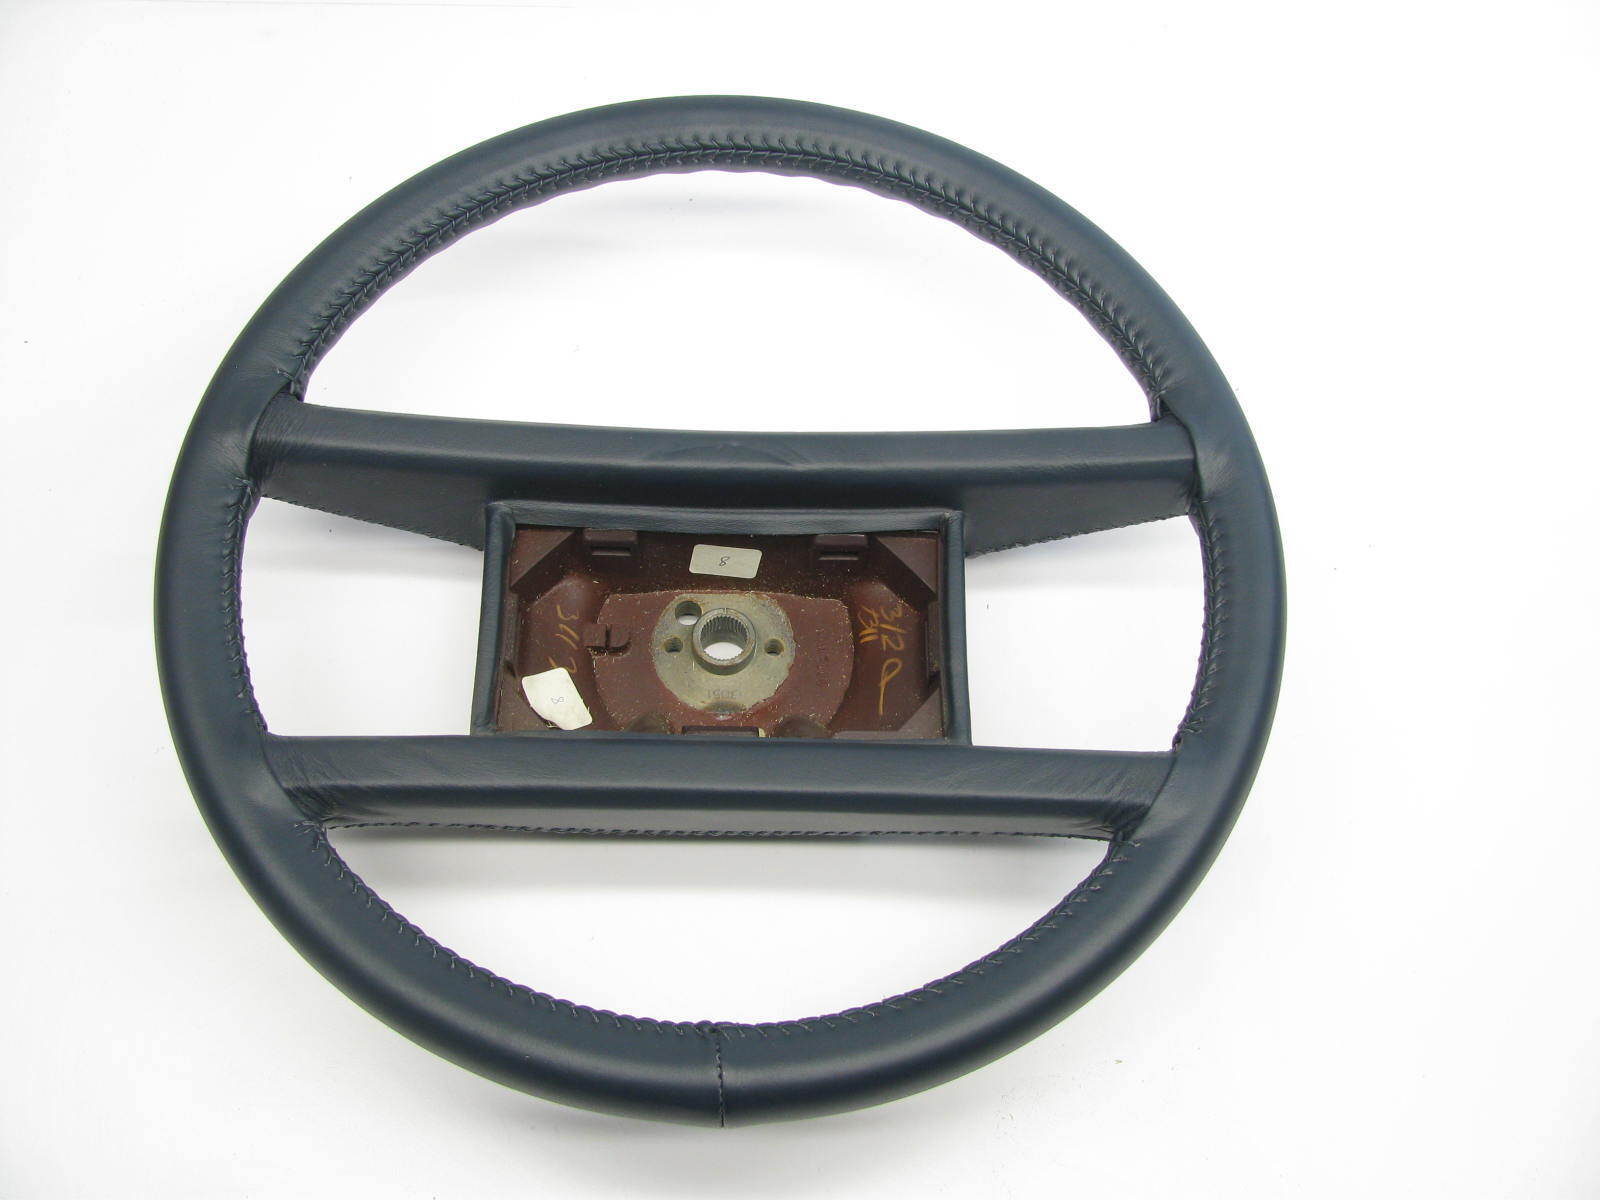 NEW - OUT OF BOX 10036723 Leather Steering Wheel For 1984-1986 Pontiac 6000